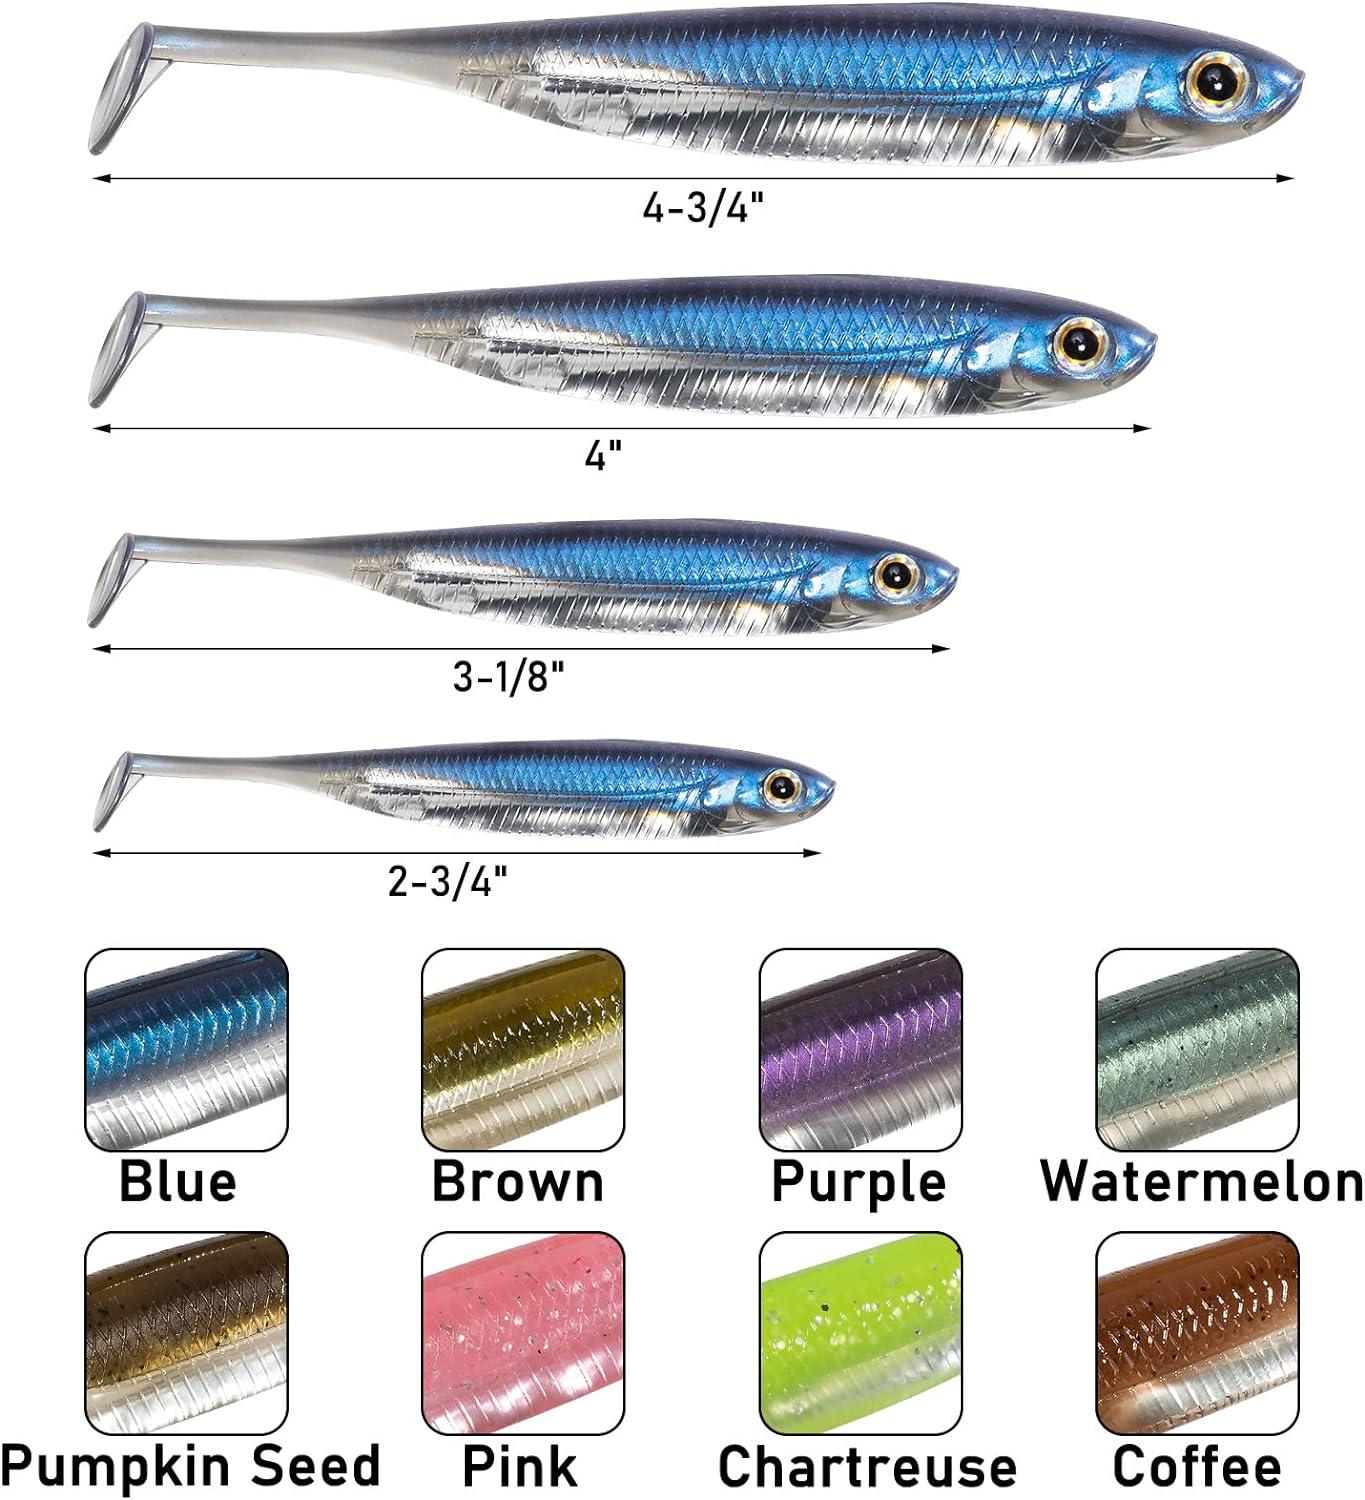 Dr.Fish Paddle Tail Swimbaits Soft Plastic Fishing Lures for Bass Fishing 2- 3/4 to 4-3/4 Inches Swim Shad Bait Minnow Lures Drop Shot Fishing Lures  Fluke Baits Watermelon 2-3/4_6 Pack